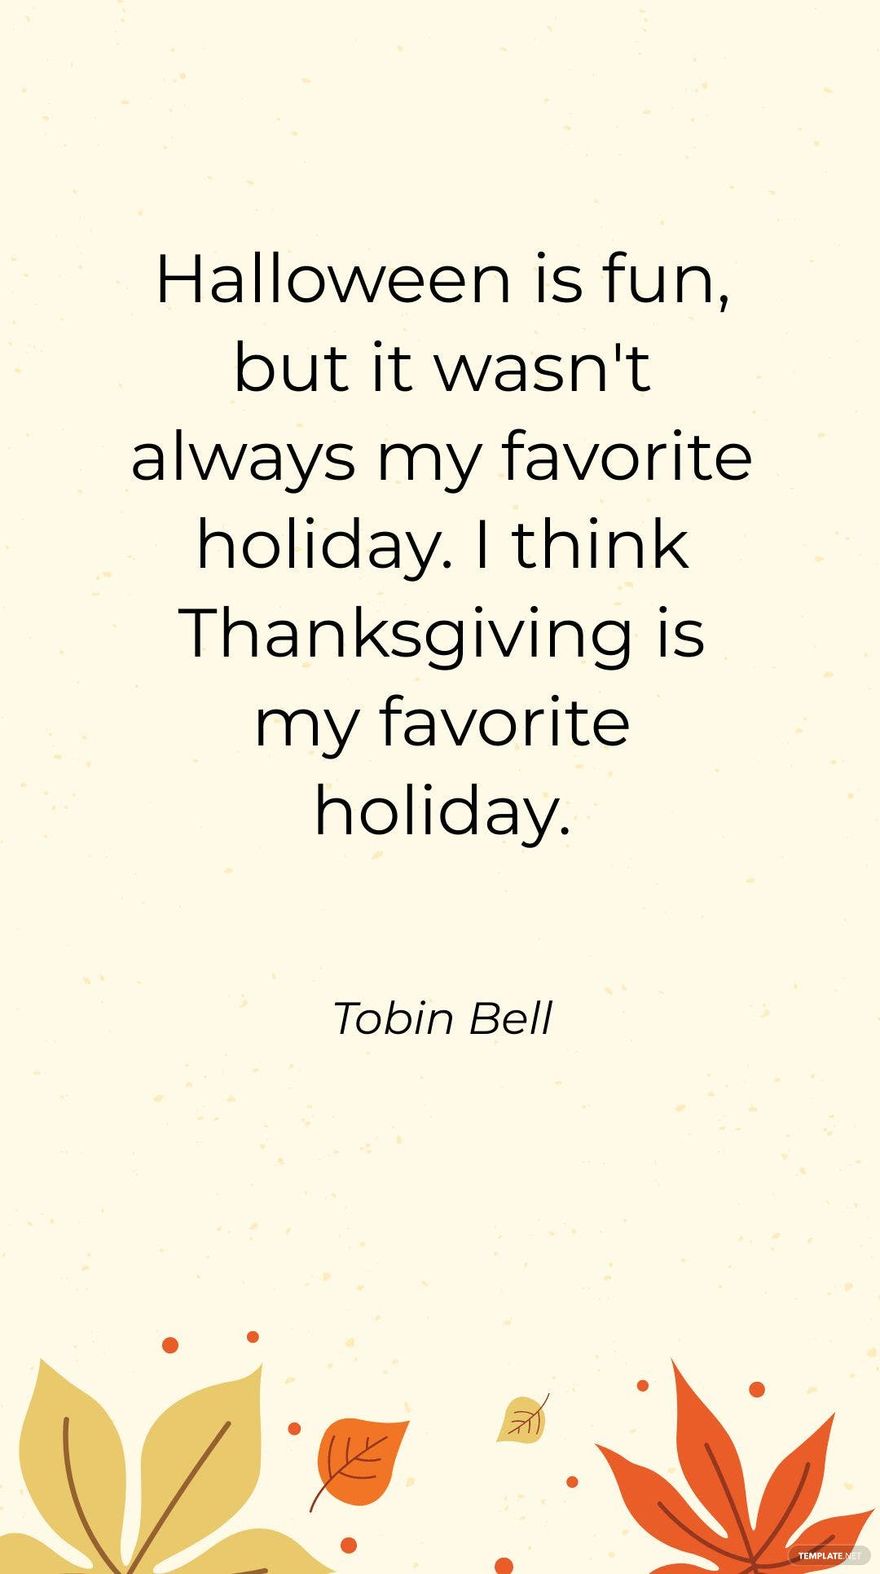 Free Tobin Bell - Halloween is fun, but it wasn't always my favorite holiday. I think Thanksgiving is my favorite holiday.